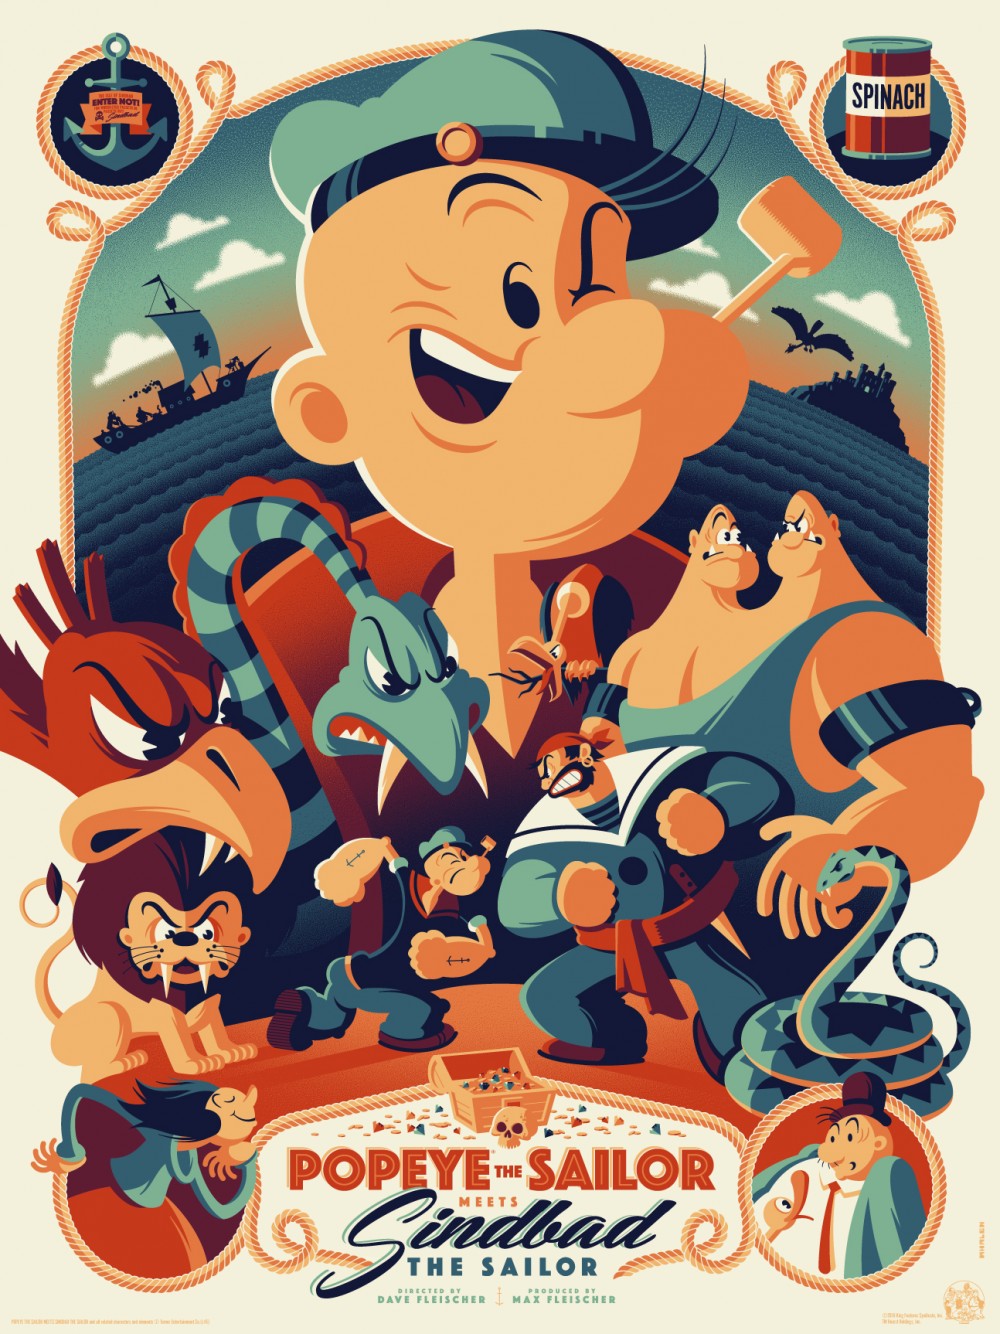 "Popeye the Sailor Meets Sinbad the Sailor" by Tom Whalen.  18" x 24" Screenprint.  Standard (Ed of 280, $65) : Foil (Ed of 10, $150)